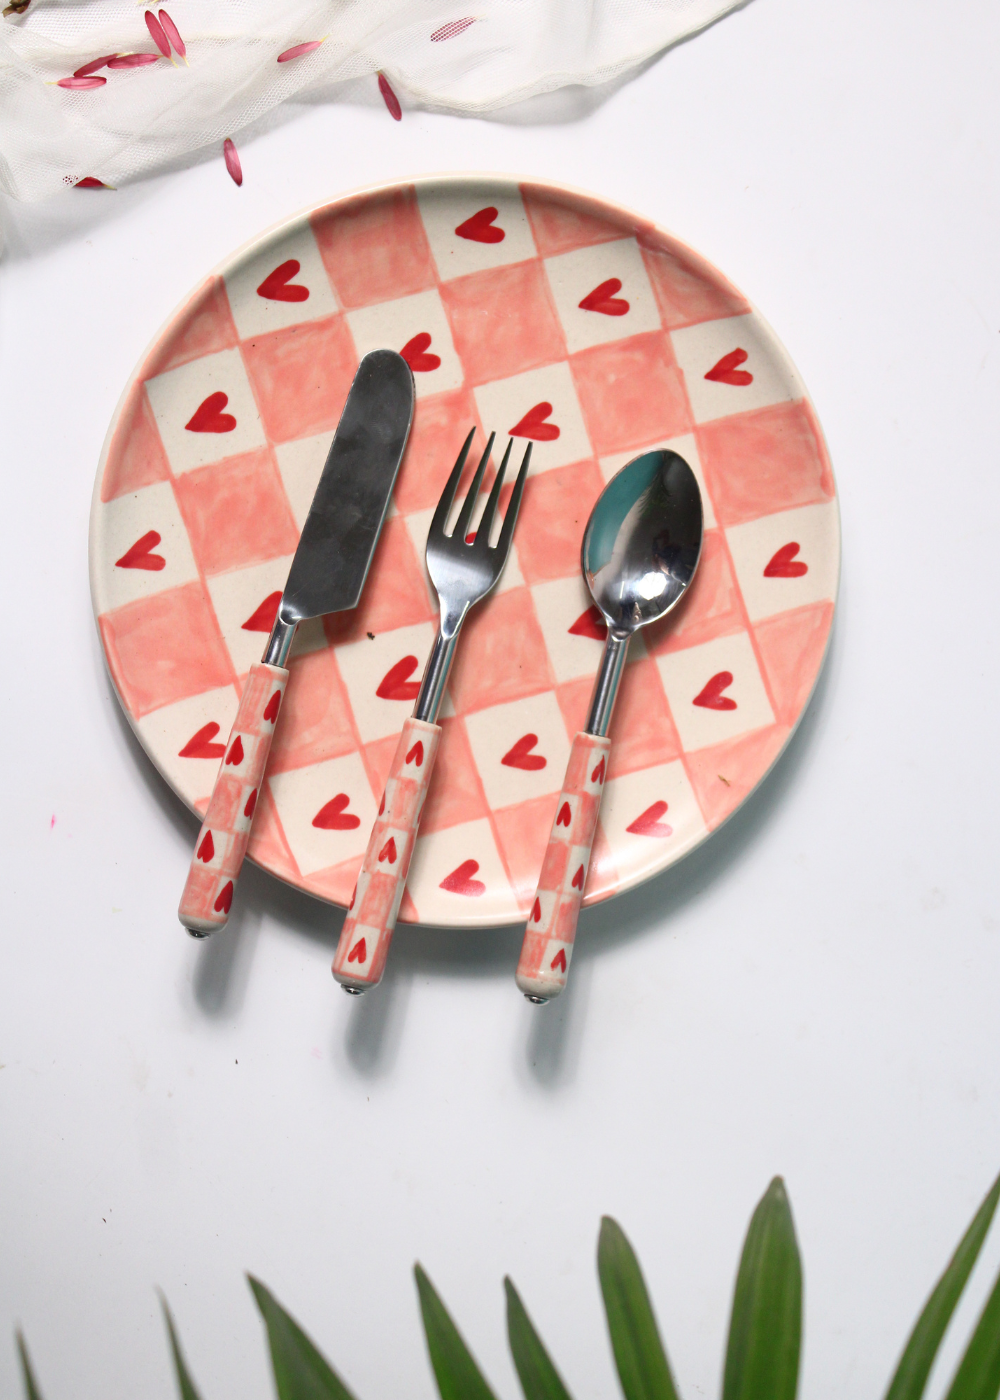 handmade chequered heart table cutlery set made by stainless steel